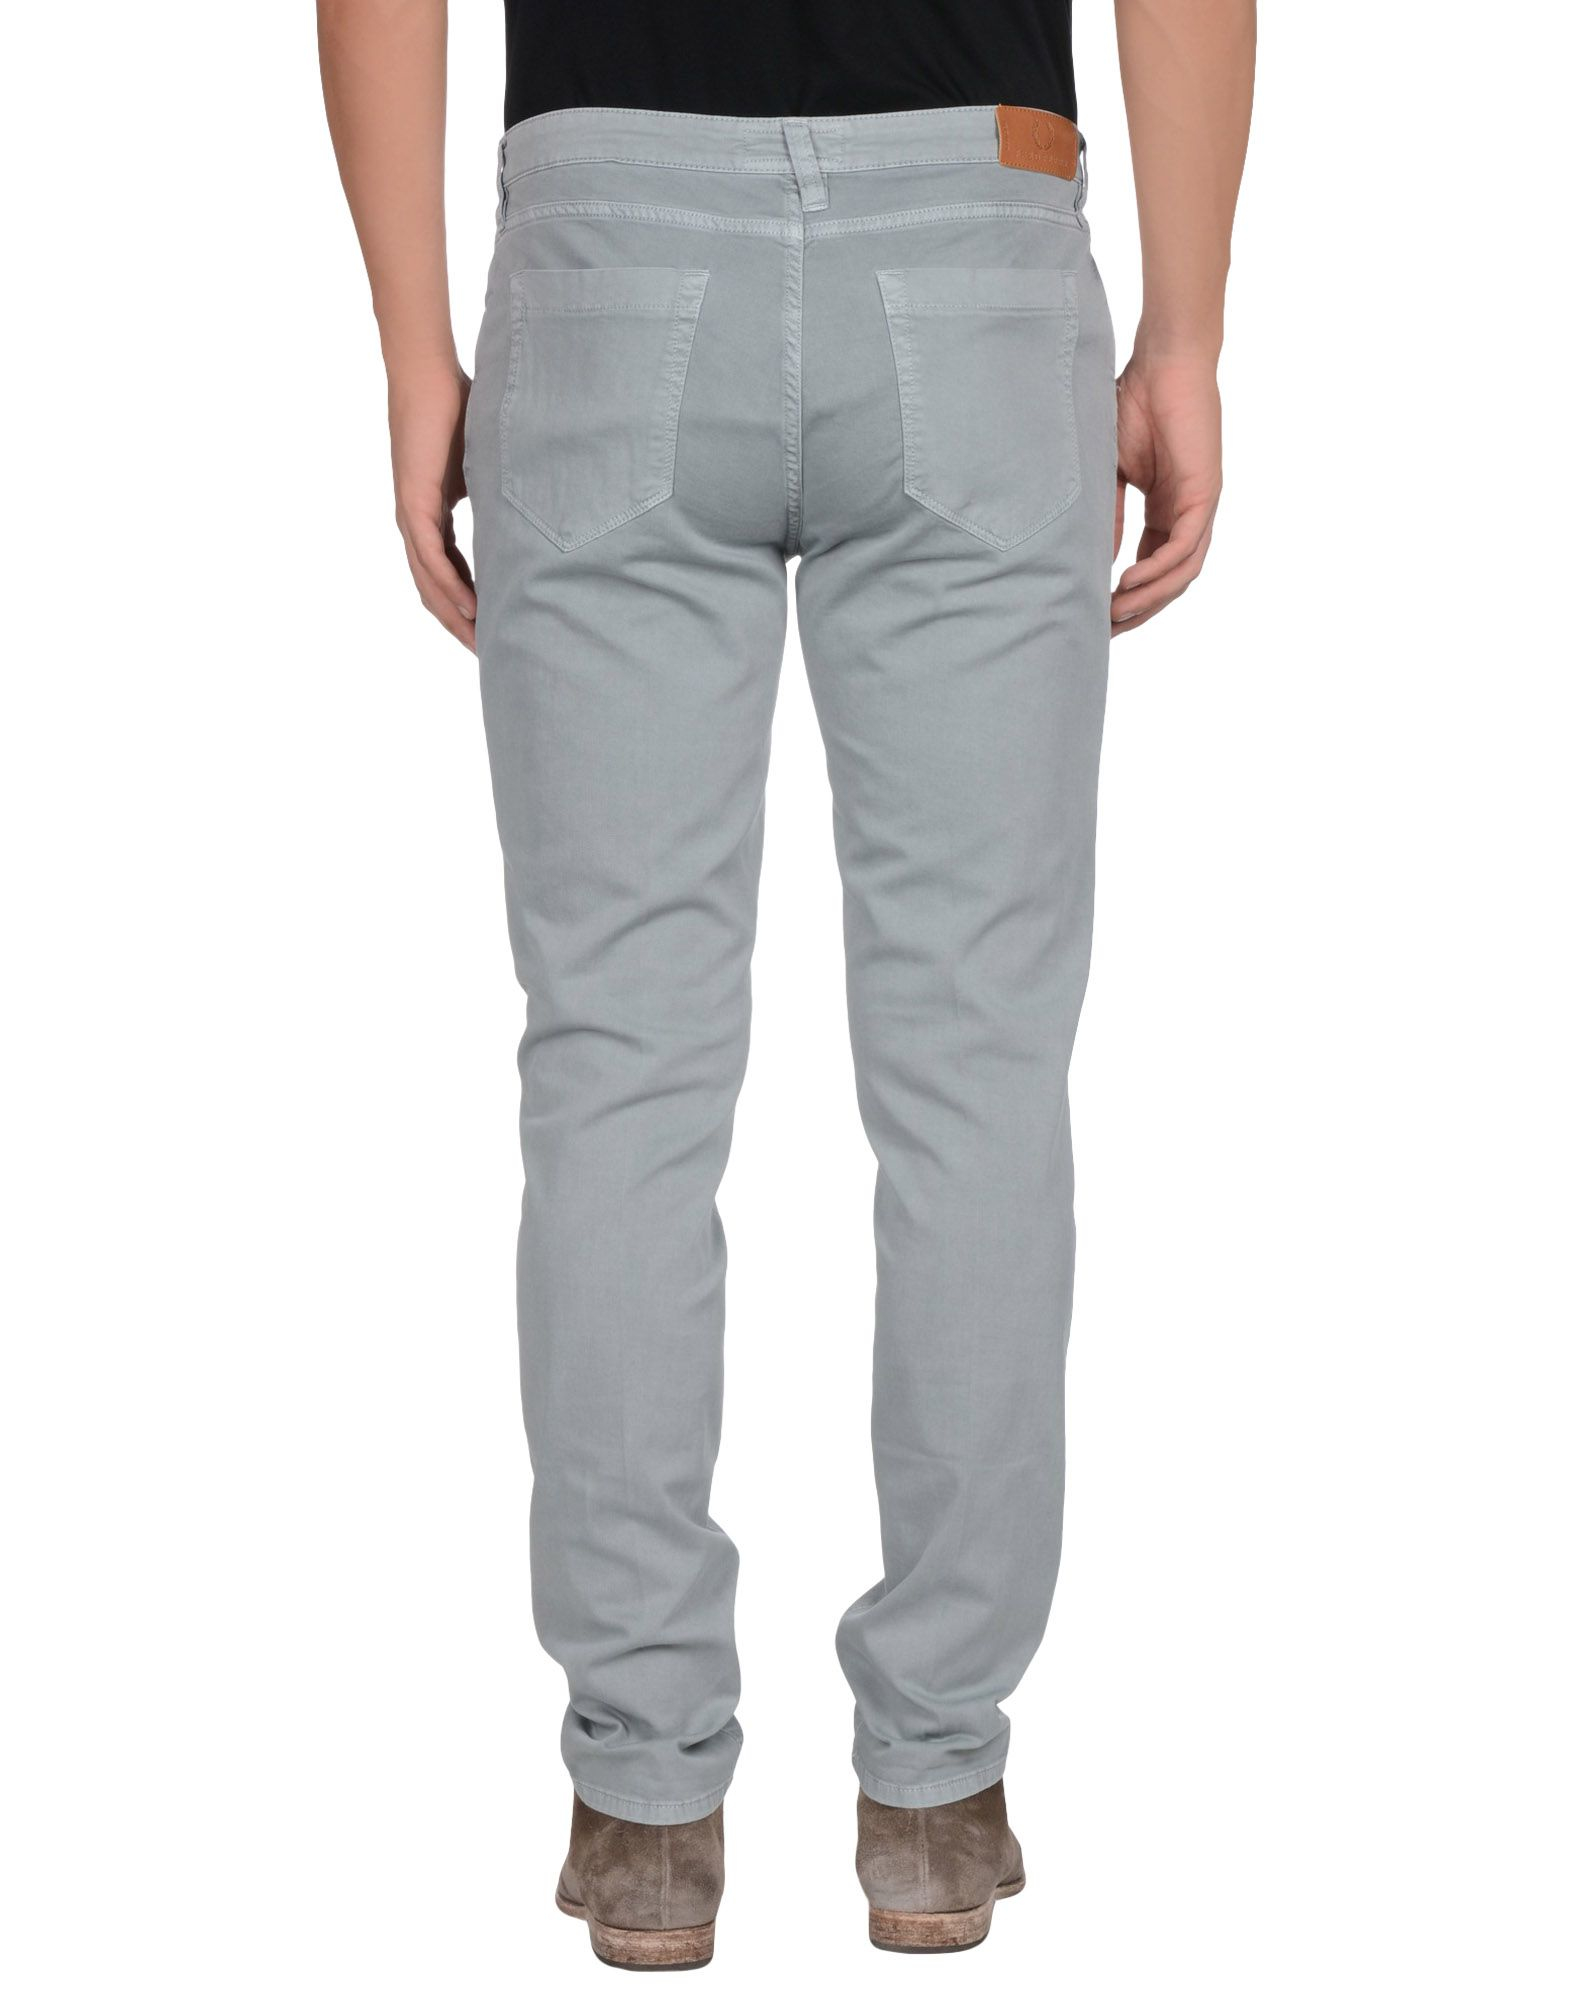 Lyst - Fred Perry Denim Trousers in Gray for Men